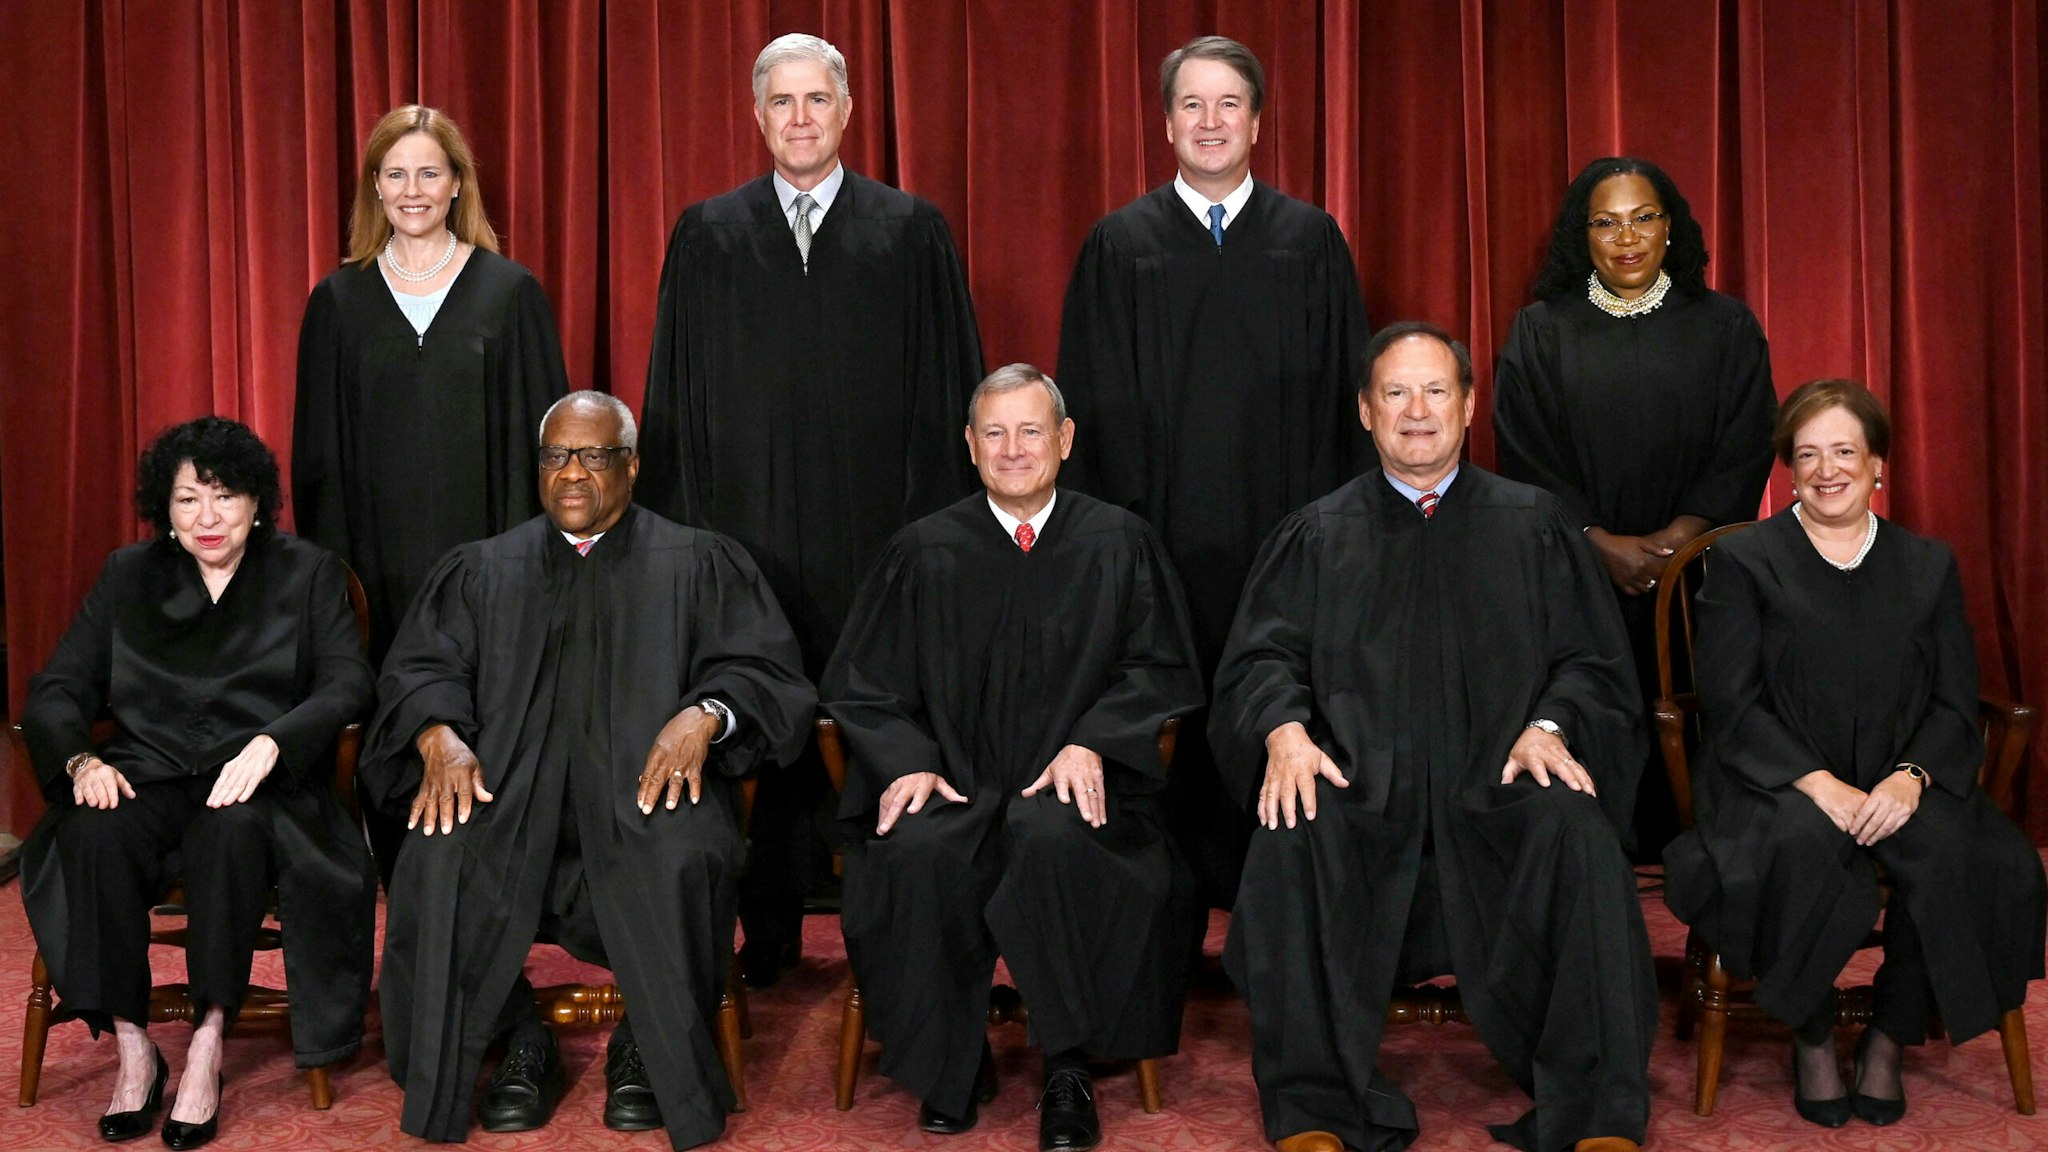 Justices of the US Supreme Court pose for their official photo at the Supreme Court in Washington, DC on October 7, 2022. - (Seated from left) Associate Justice Sonia Sotomayor, Associate Justice Clarence Thomas, Chief Justice John Roberts, Associate Justice Samuel Alito and Associate Justice Elena Kagan, (Standing behind from left) Associate Justice Amy Coney Barrett, Associate Justice Neil Gorsuch, Associate Justice Brett Kavanaugh and Associate Justice Ketanji Brown Jackson.